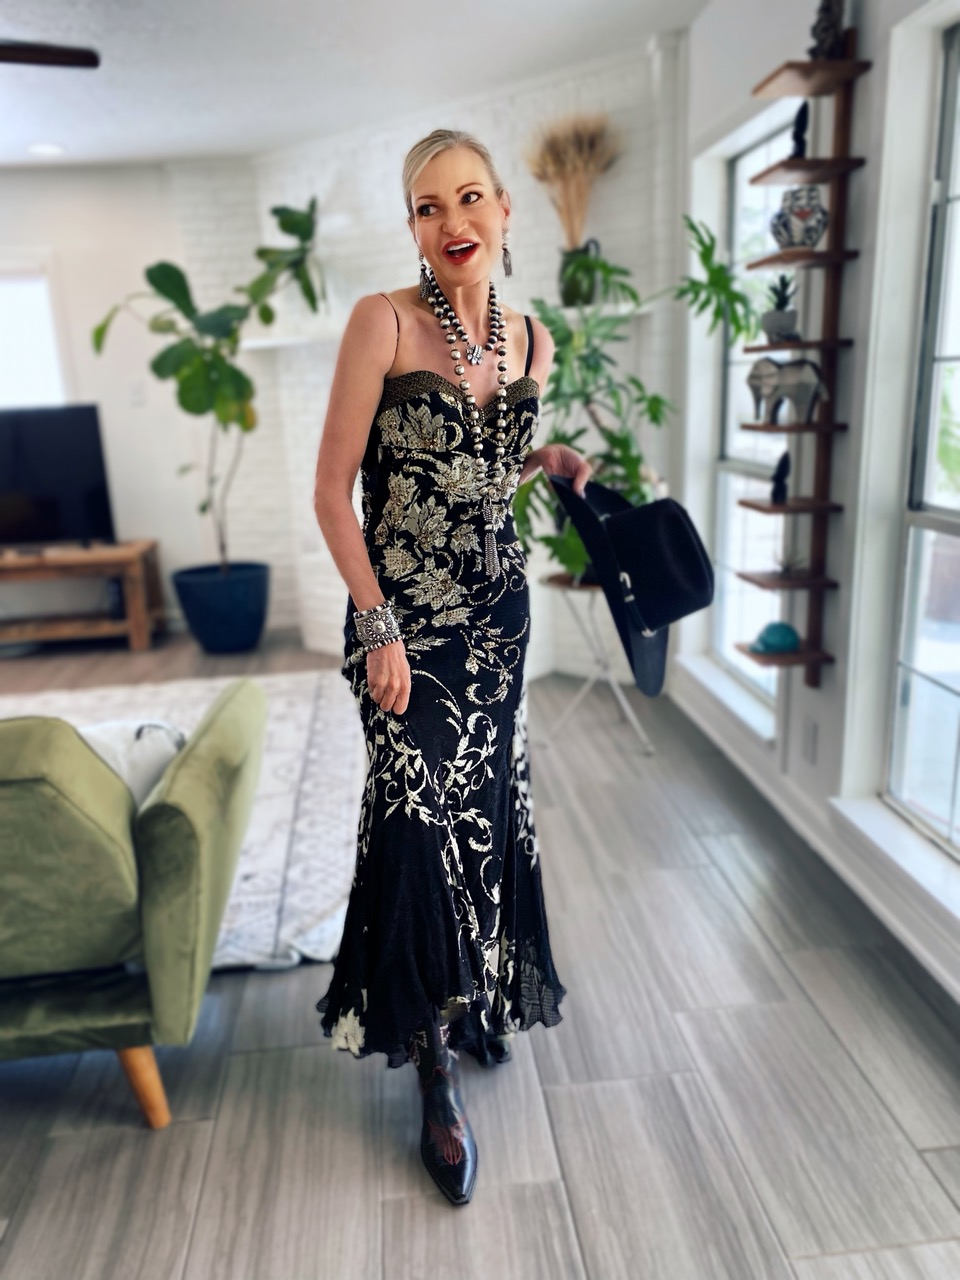 Lifestyle Influencer, Jamie Lewinger of More Than Turquoise, wearing Shoofly 505 Southwestern jewelry 